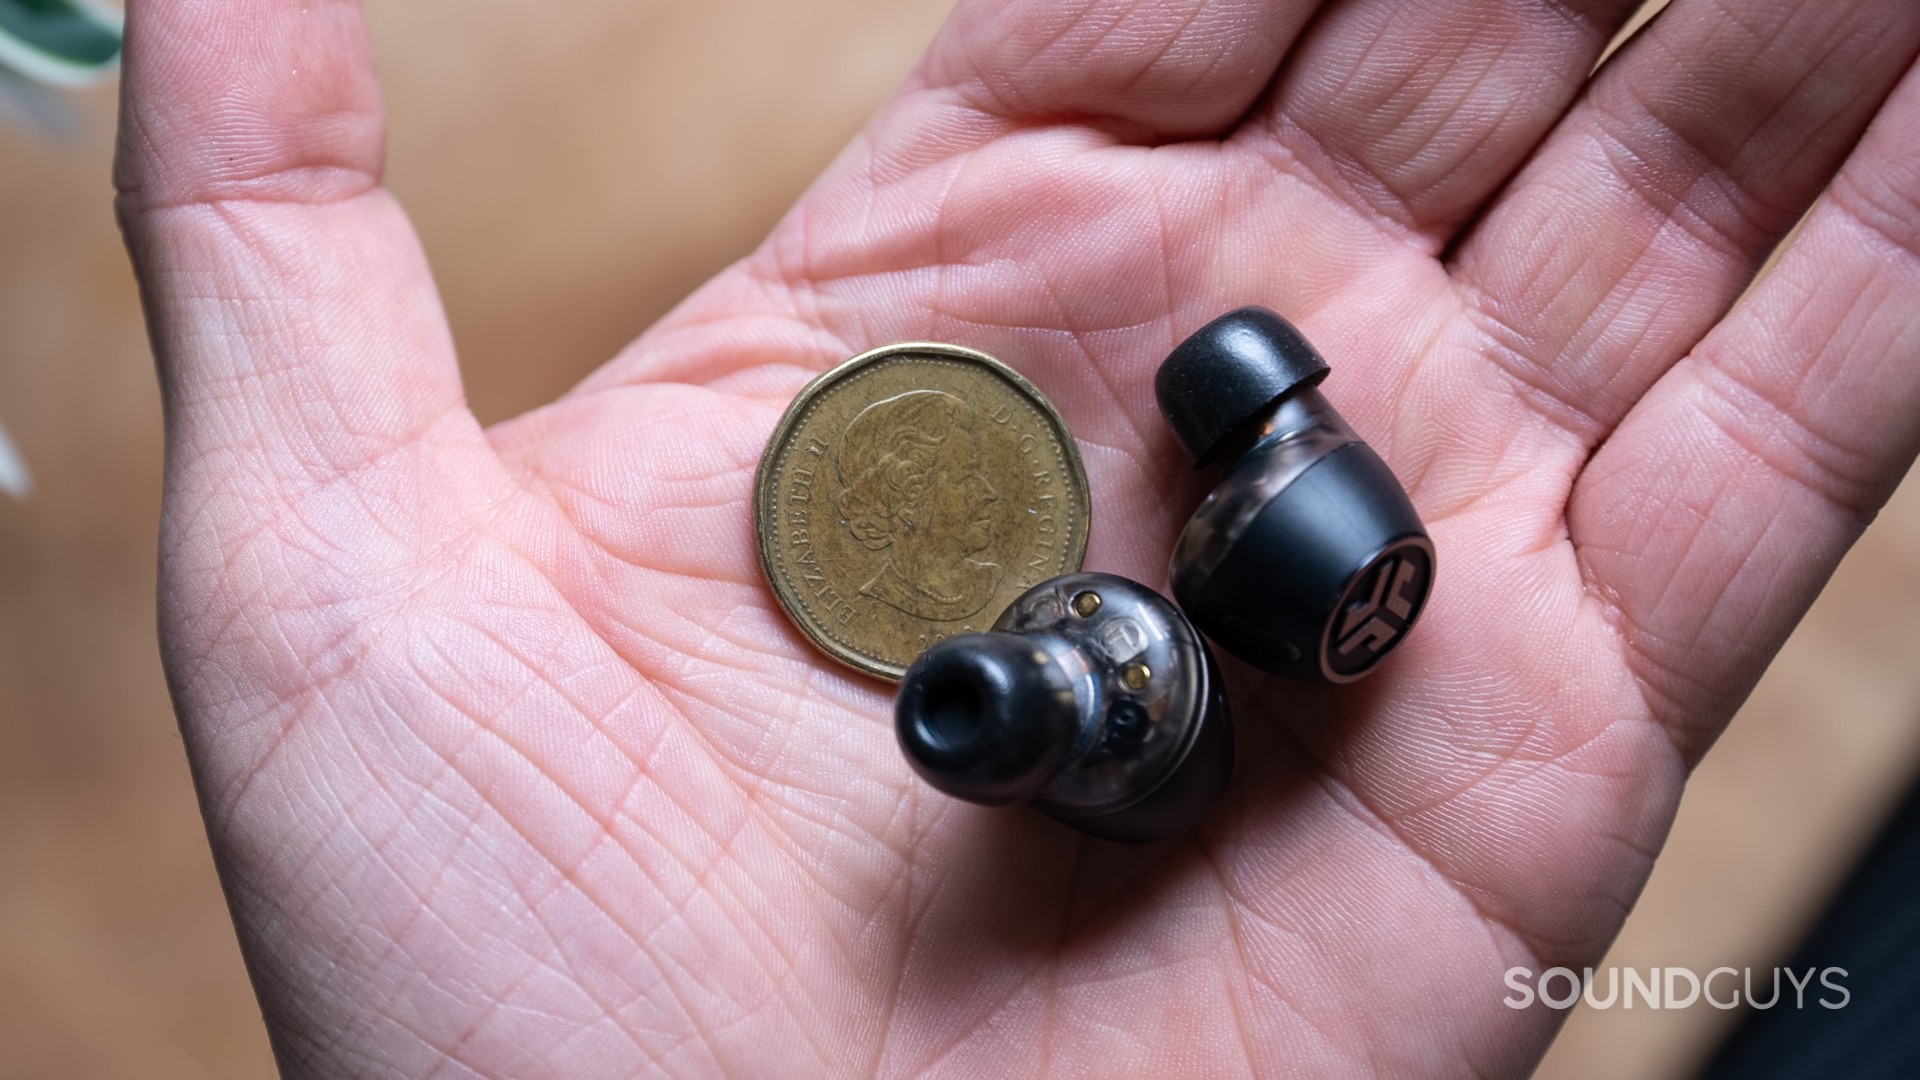 The JLab Epic Lab Edition is fairly large as earbuds go, but still small enough for most ears.